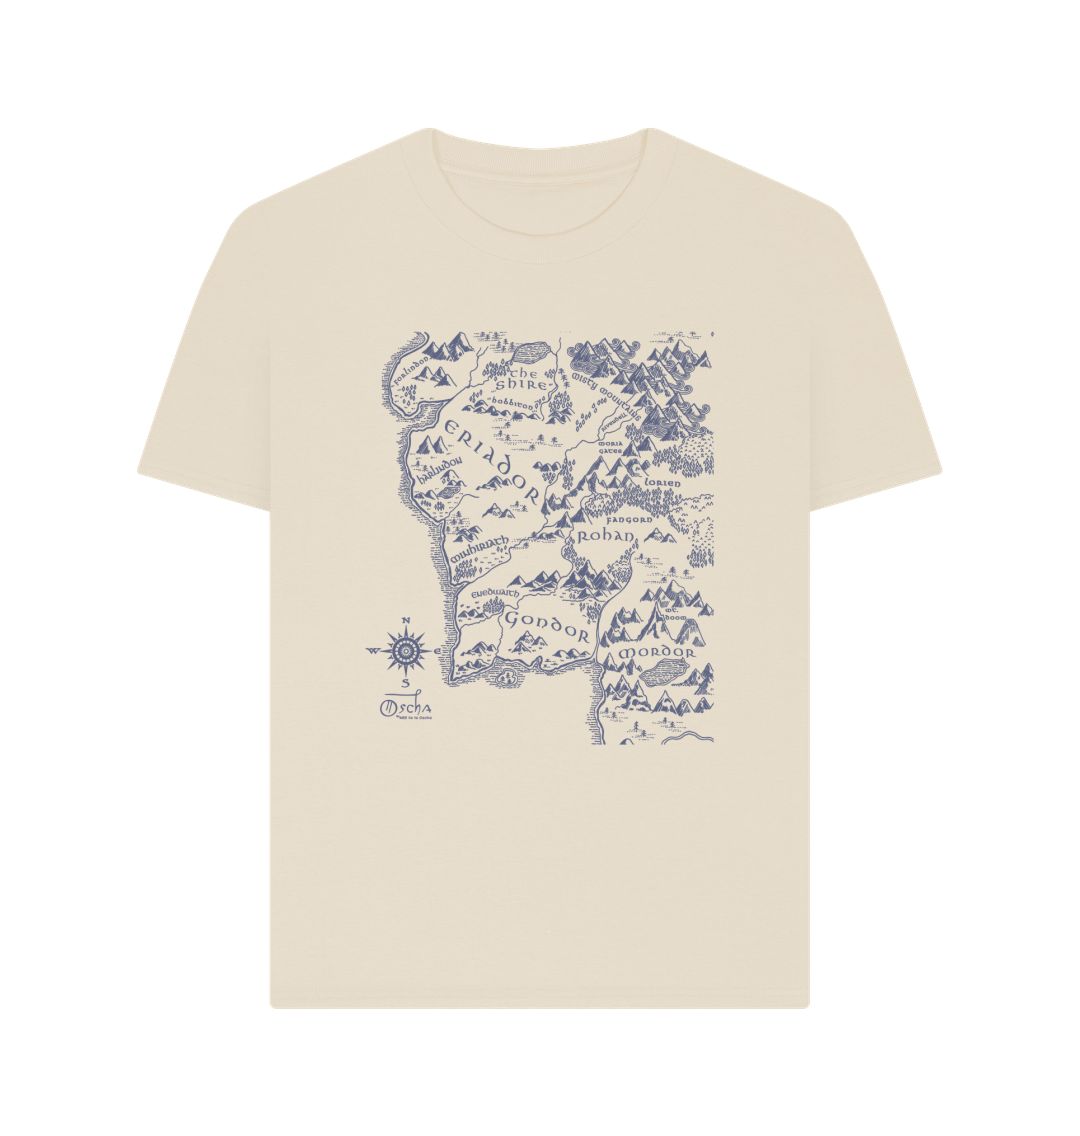 Oat Realm of MIDDLE-EARTH\u2122 Women's T-shirt